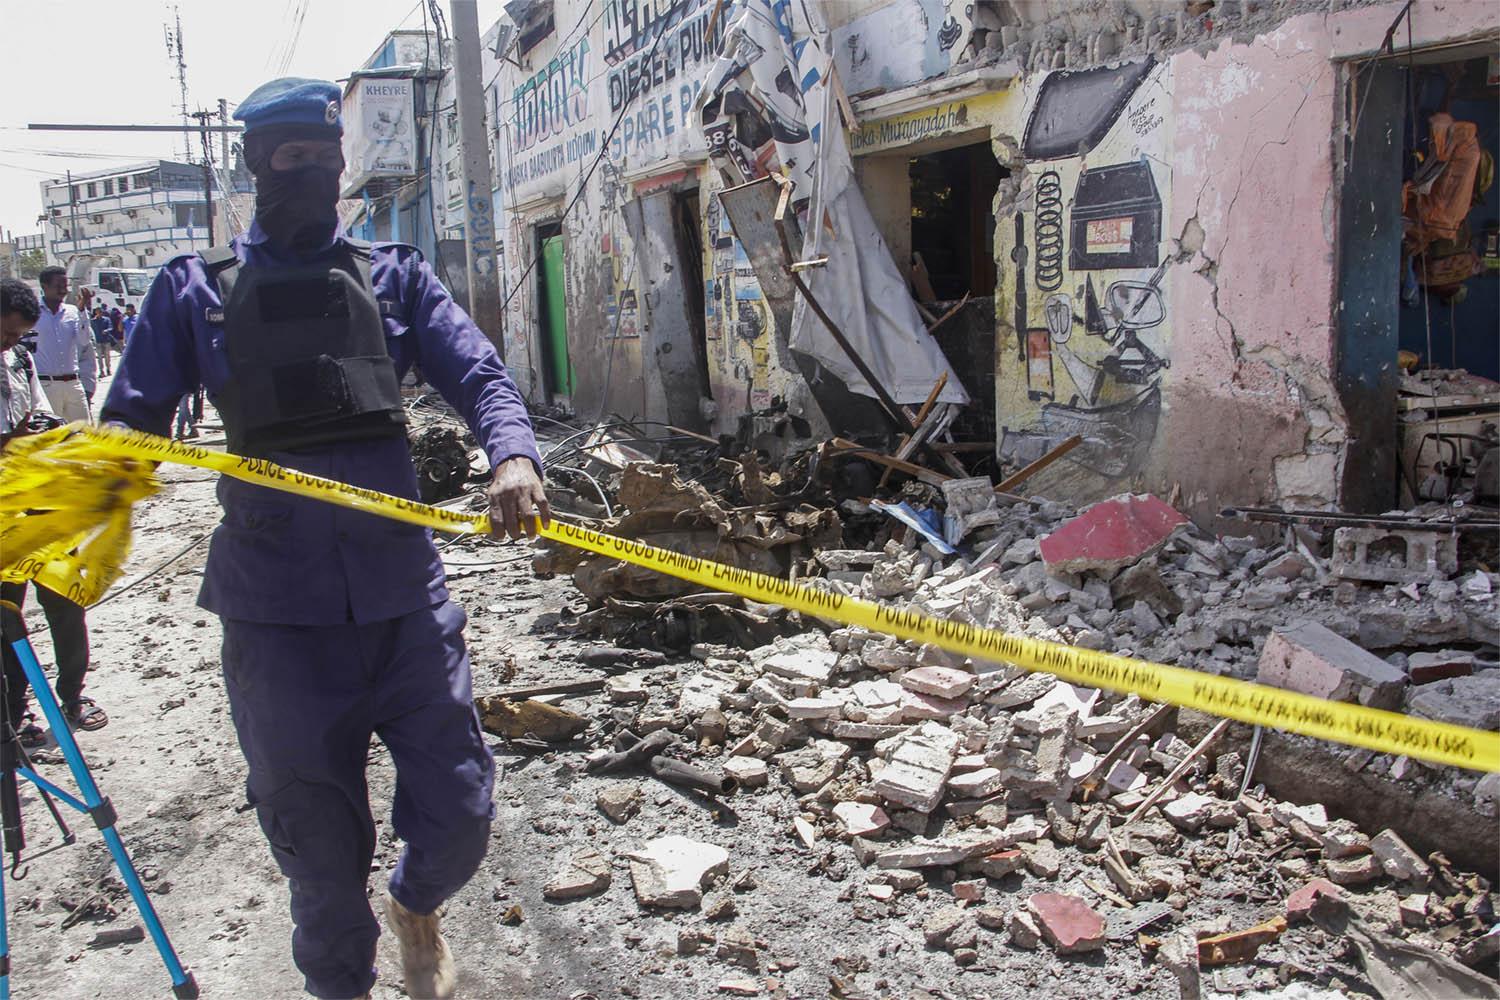 Al-Shabab claimed responsibility for the attack